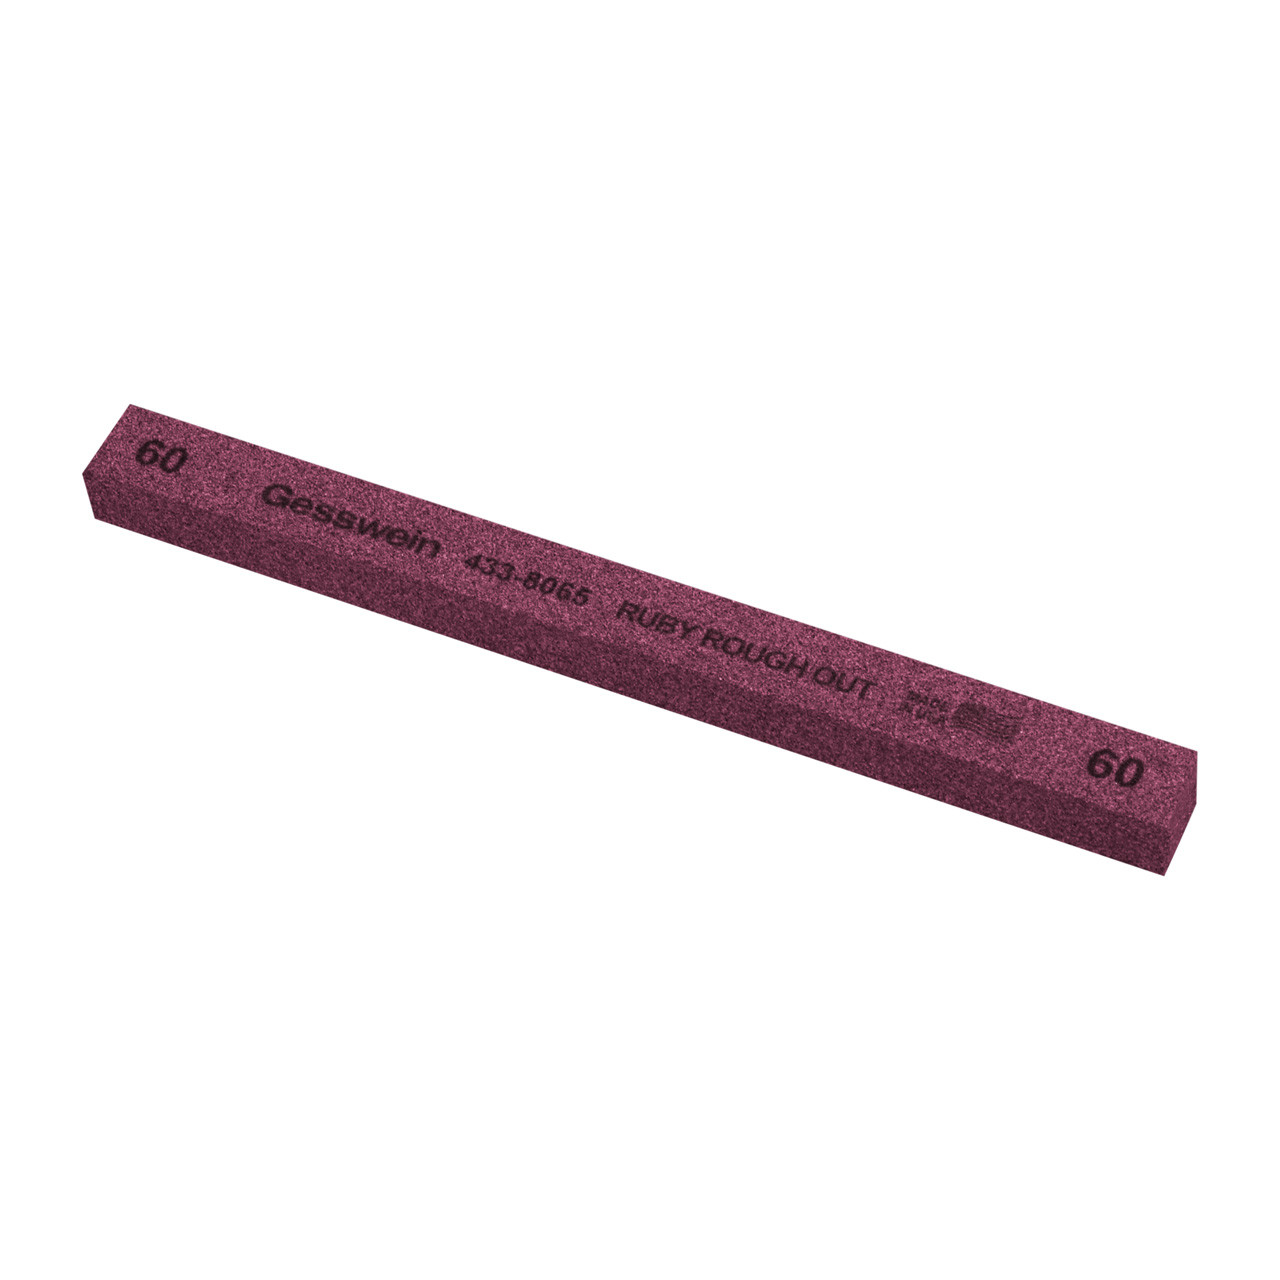 Gesswein® Ruby Rough Out Stone - 1/2" x 1/2" x 6", 60 Grit  (Pkg. of 6)